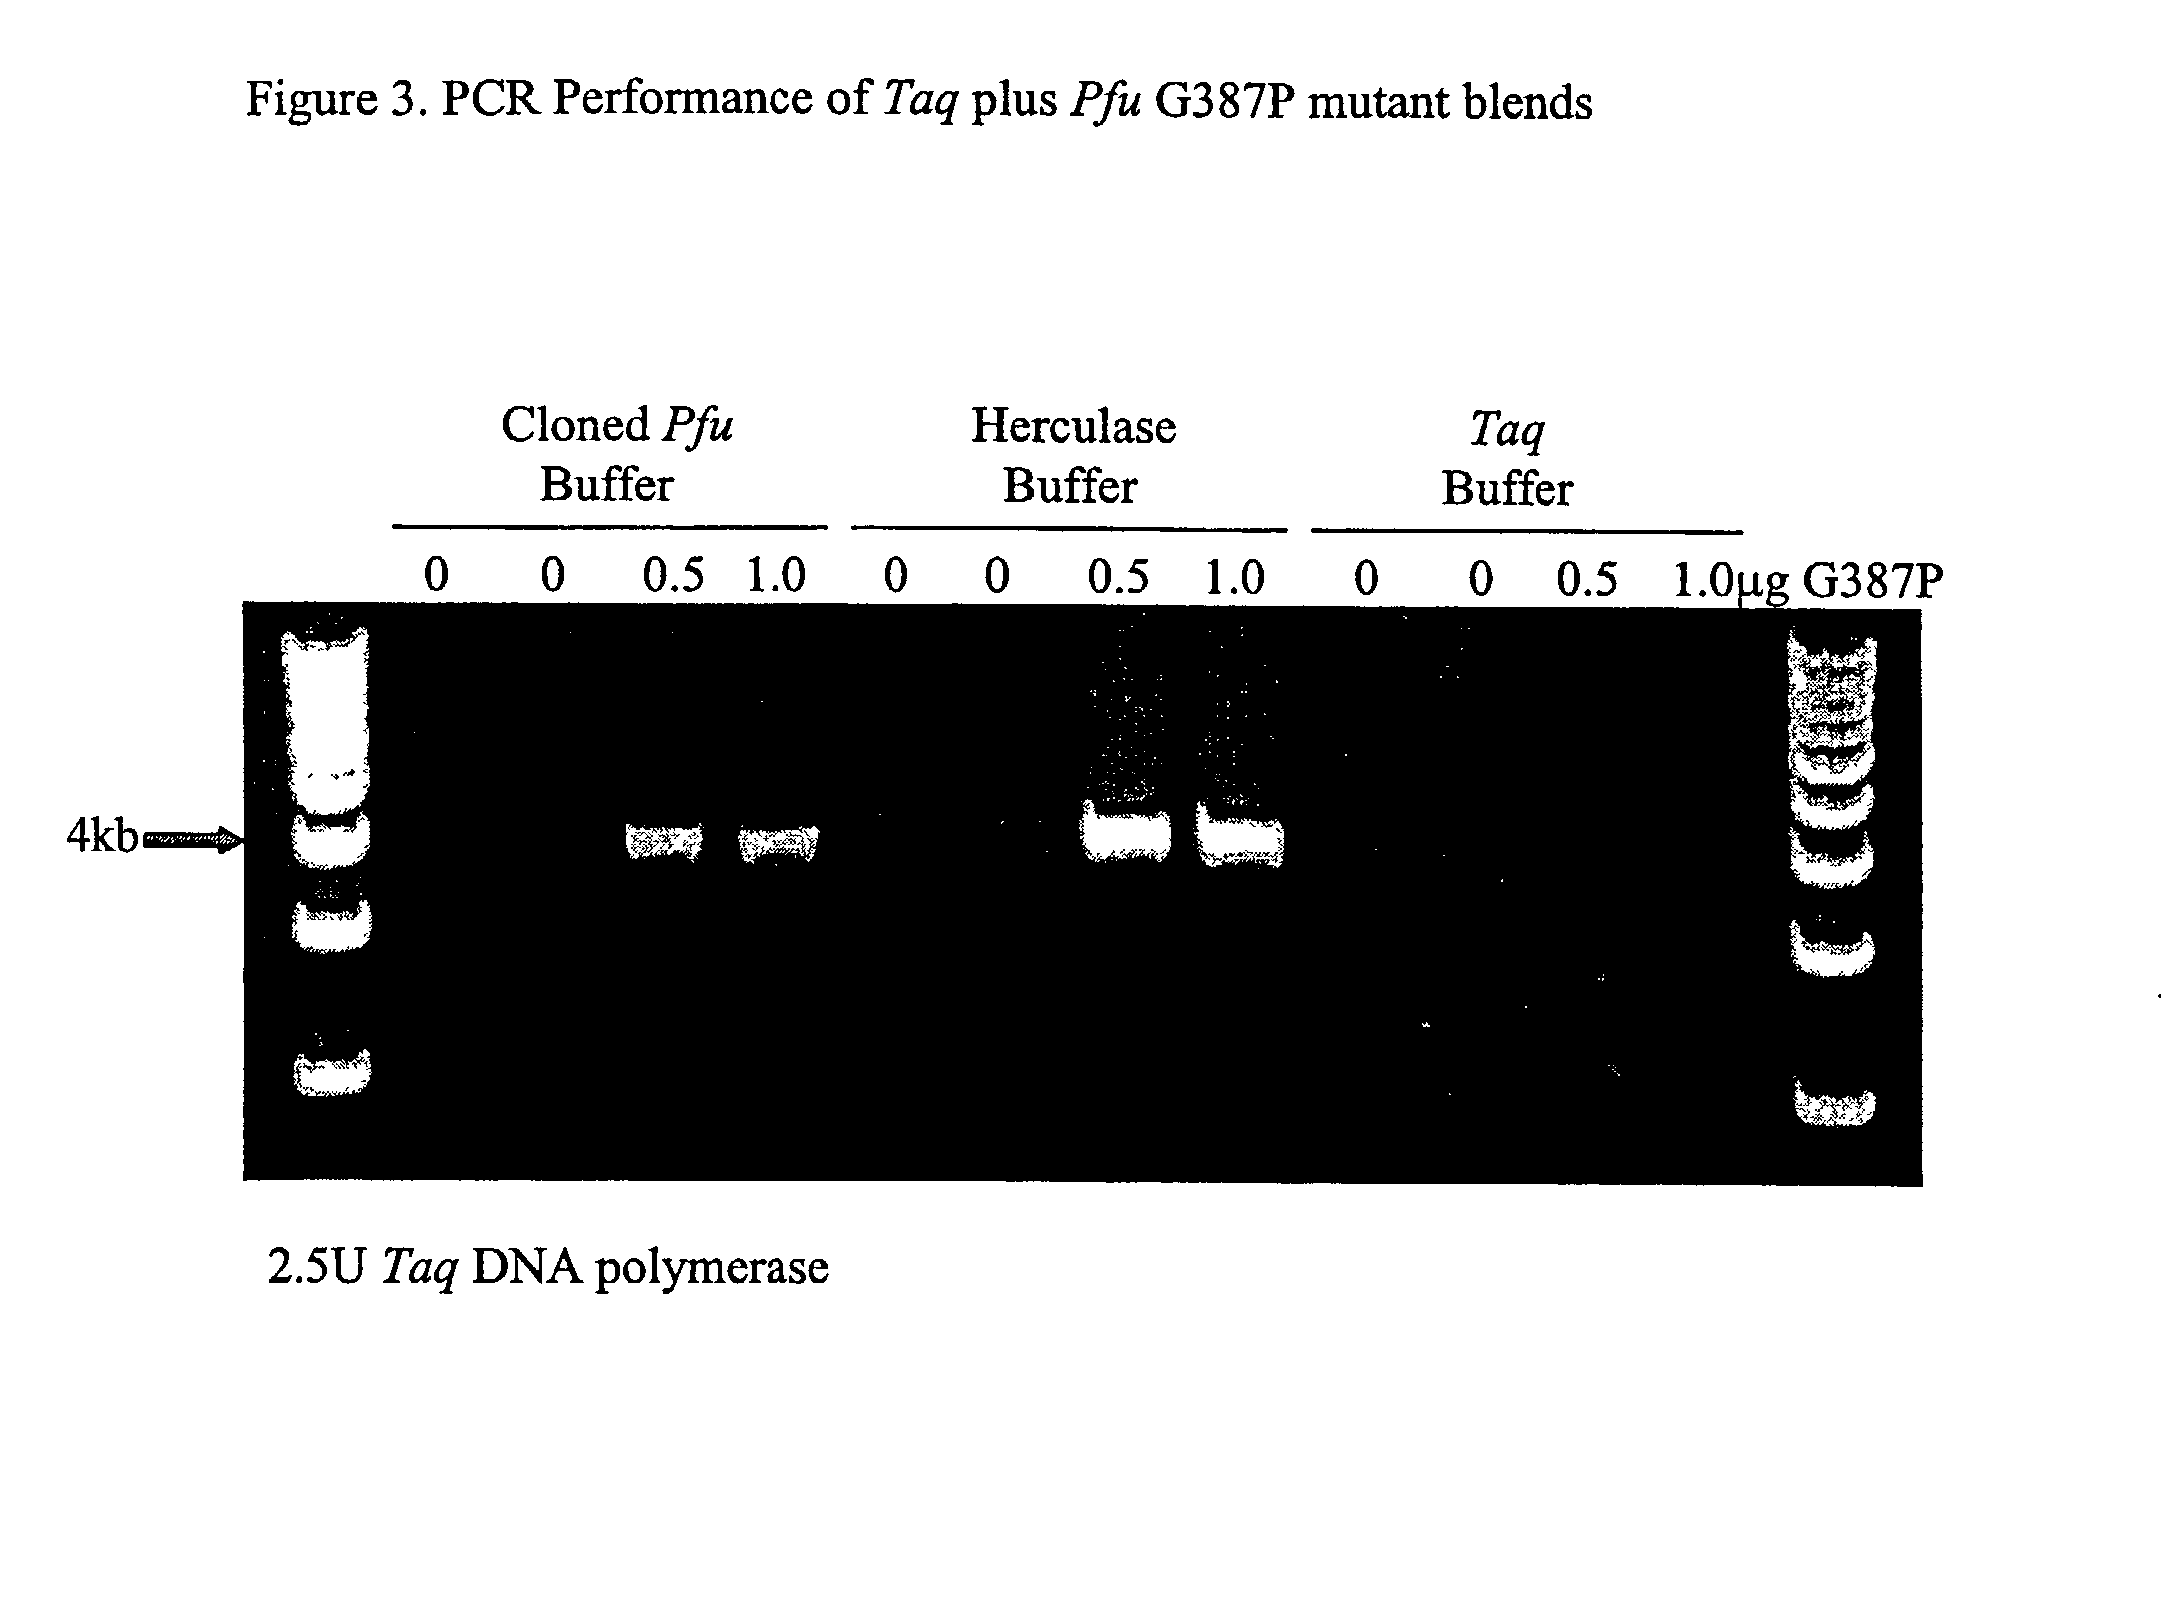 High fidelity DNA polymerase compositions and uses therefor